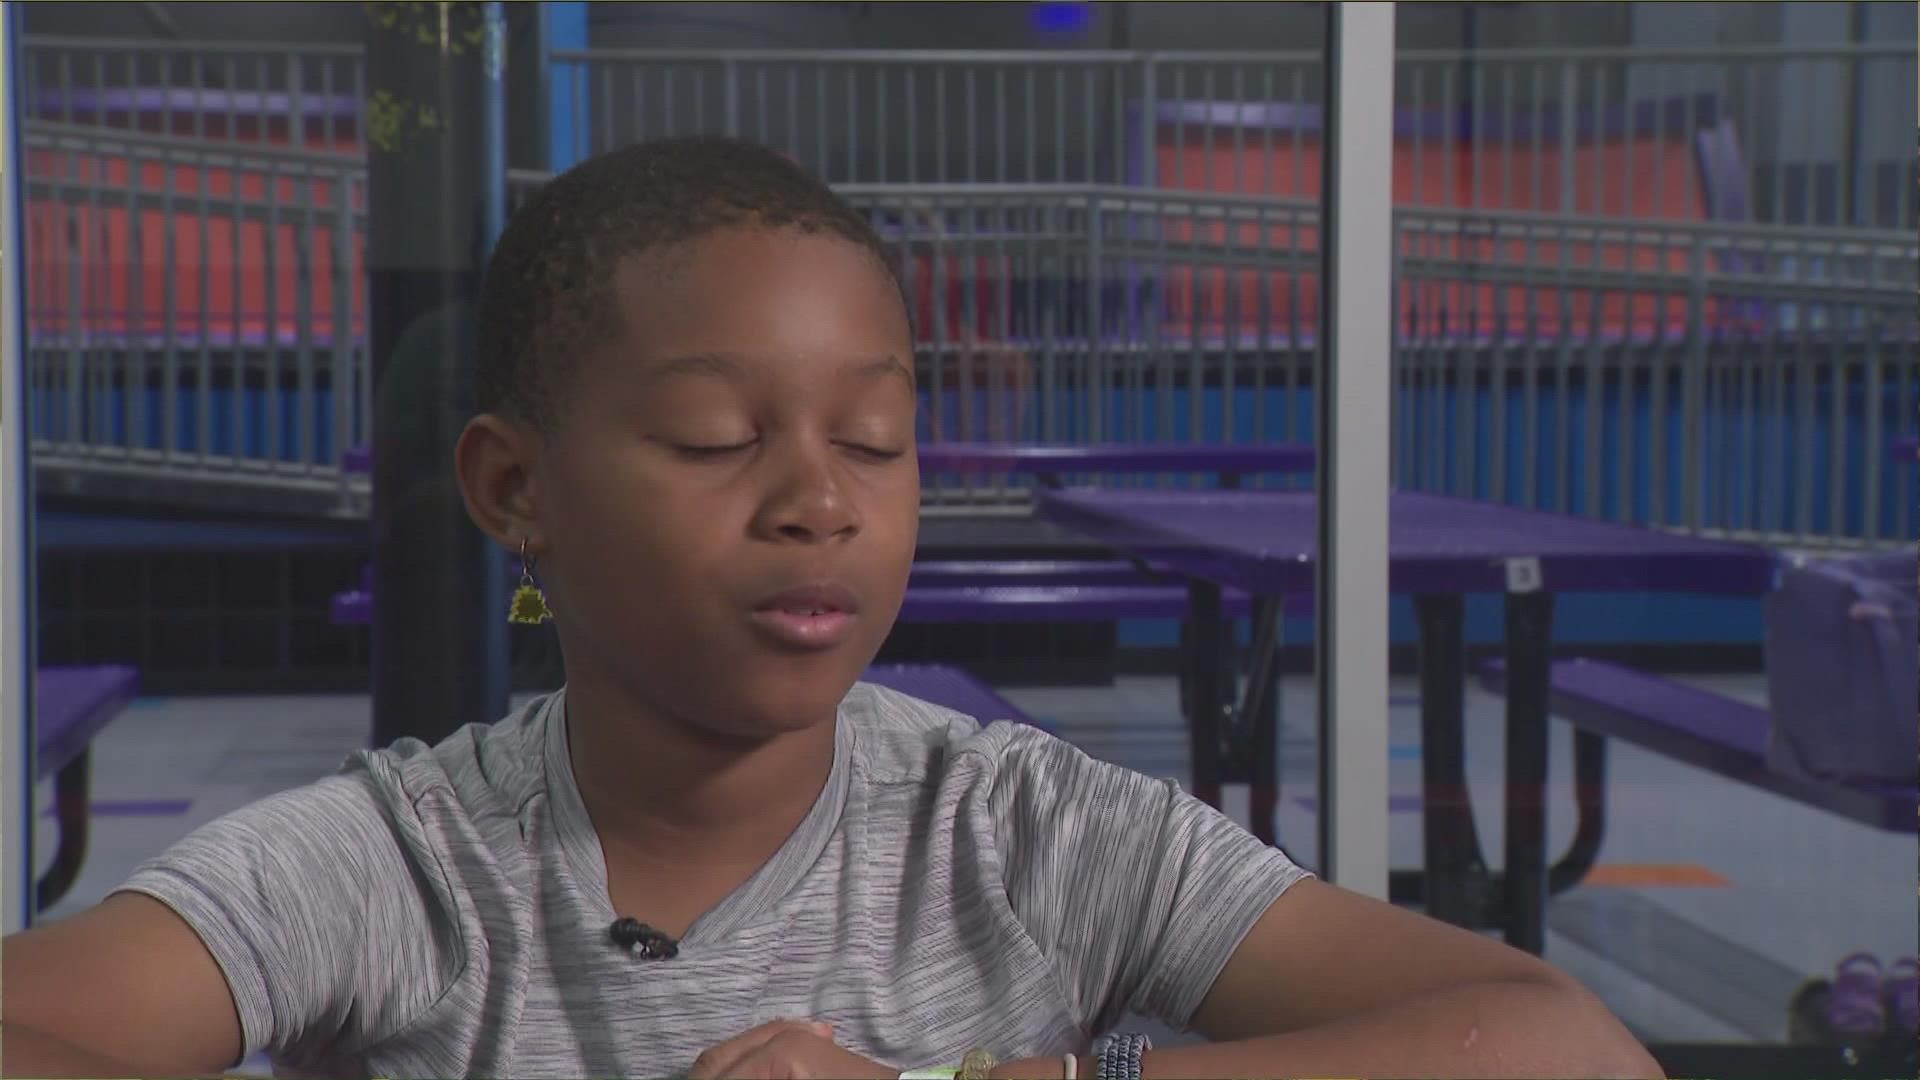 Every week, KVUE features a local child in foster care who is looking for an adoptive family. This week, we're introducing you to Michael.